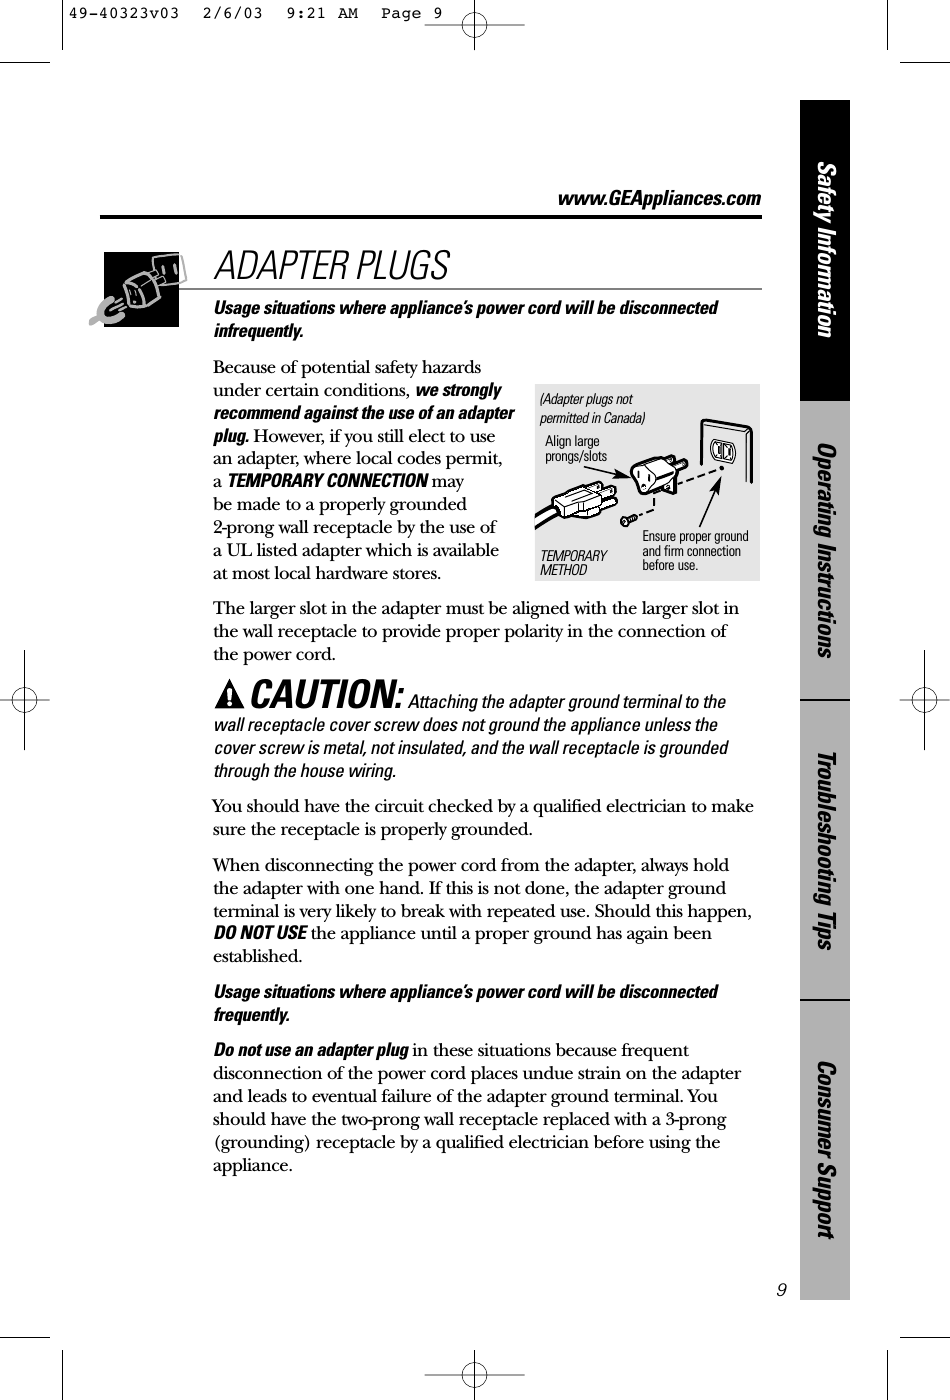 Consumer SupportTroubleshooting TipsOperating InstructionsSafety InformationUsage situations where appliance’s power cord will be disconnectedinfrequently.Because of potential safety hazardsunder certain conditions, we stronglyrecommend against the use of an adapterplug. However, if you still elect to use an adapter, where local codes permit, a TEMPORARY CONNECTION may be made to a properly grounded 2-prong wall receptacle by the use of a UL listed adapter which is available at most local hardware stores.The larger slot in the adapter must be aligned with the larger slot inthe wall receptacle to provide proper polarity in the connection of the power cord.CAUTION: Attaching the adapter ground terminal to thewall receptacle cover screw does not ground the appliance unless thecover screw is metal, not insulated, and the wall receptacle is groundedthrough the house wiring. You should have the circuit checked by a qualified electrician to makesure the receptacle is properly grounded.When disconnecting the power cord from the adapter, always hold the adapter with one hand. If this is not done, the adapter groundterminal is very likely to break with repeated use. Should this happen,DO NOT USE the appliance until a proper ground has again beenestablished.Usage situations where appliance’s power cord will be disconnectedfrequently.Do not use an adapter plug in these situations because frequentdisconnection of the power cord places undue strain on the adapterand leads to eventual failure of the adapter ground terminal. Youshould have the two-prong wall receptacle replaced with a 3-prong(grounding) receptacle by a qualified electrician before using theappliance.ADAPTER PLUGS9Ensure proper ground and firm connectionbefore use.TEMPORARYMETHODAlign largeprongs/slots(Adapter plugs notpermitted in Canada)www.GEAppliances.com49-40323v03  2/6/03  9:21 AM  Page 9